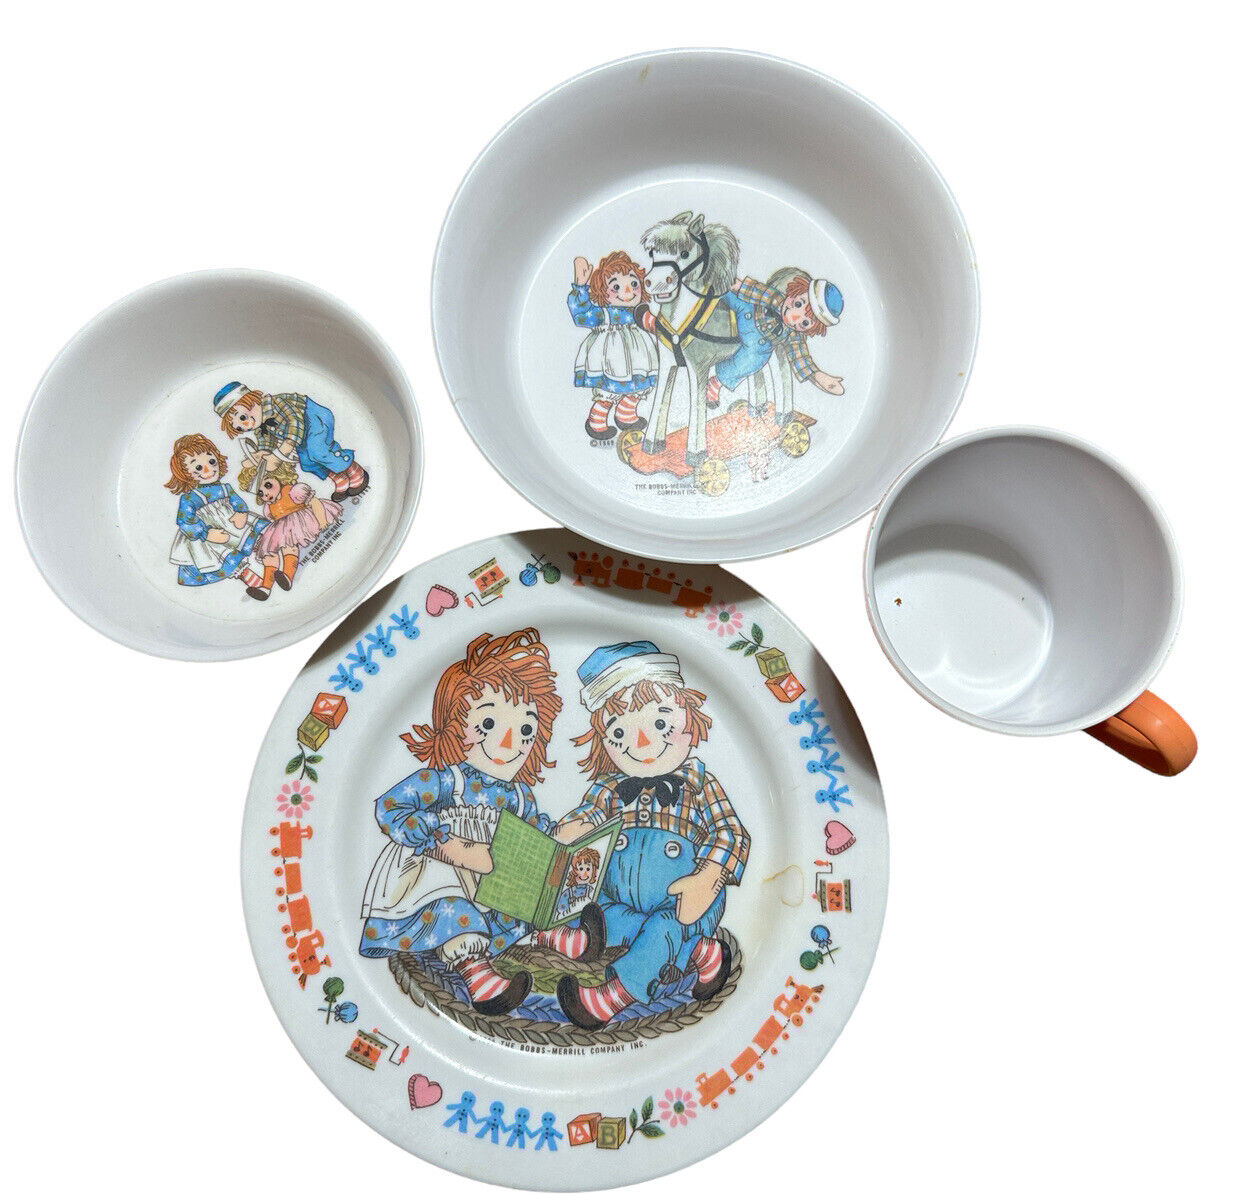 Vintage 1969 4 pc Raggedy Ann Childs Set Oneida Deluxe Rimmed Plate, Cup, Bowls